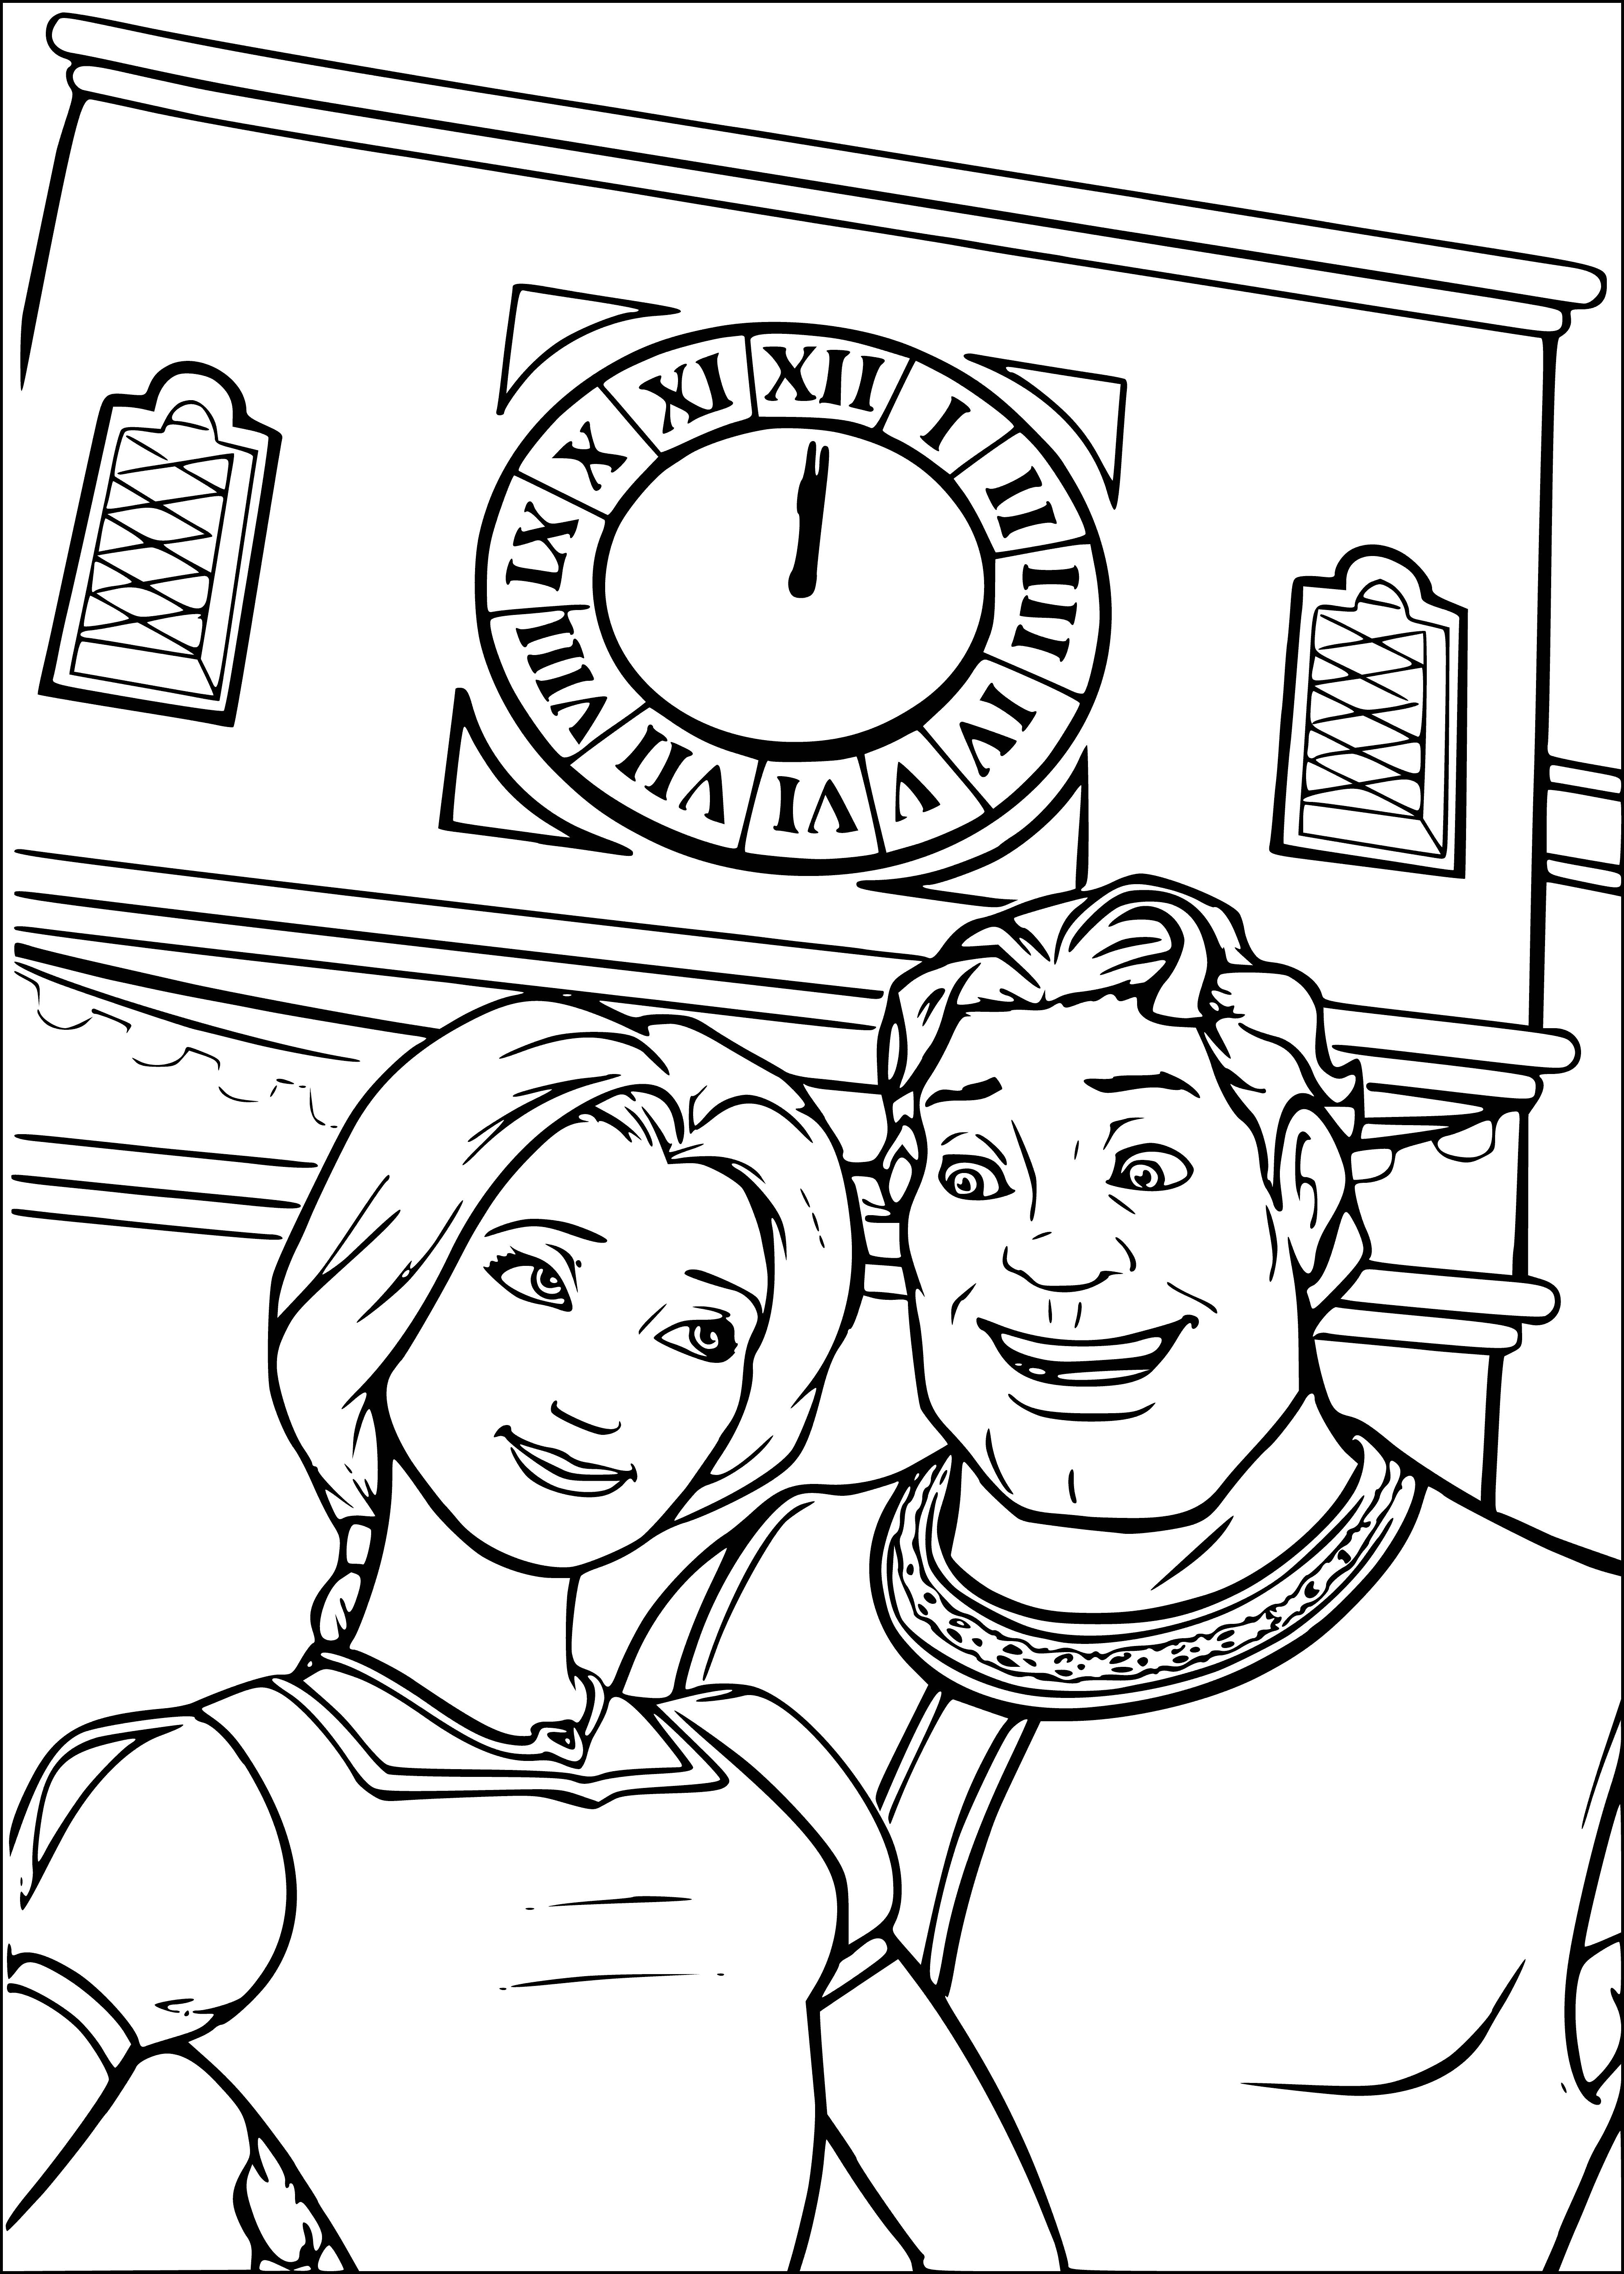 coloring page: Shrek, a large green ogre, is looking at a tall cuckoo clock that has just struck midnight with a worried expression.